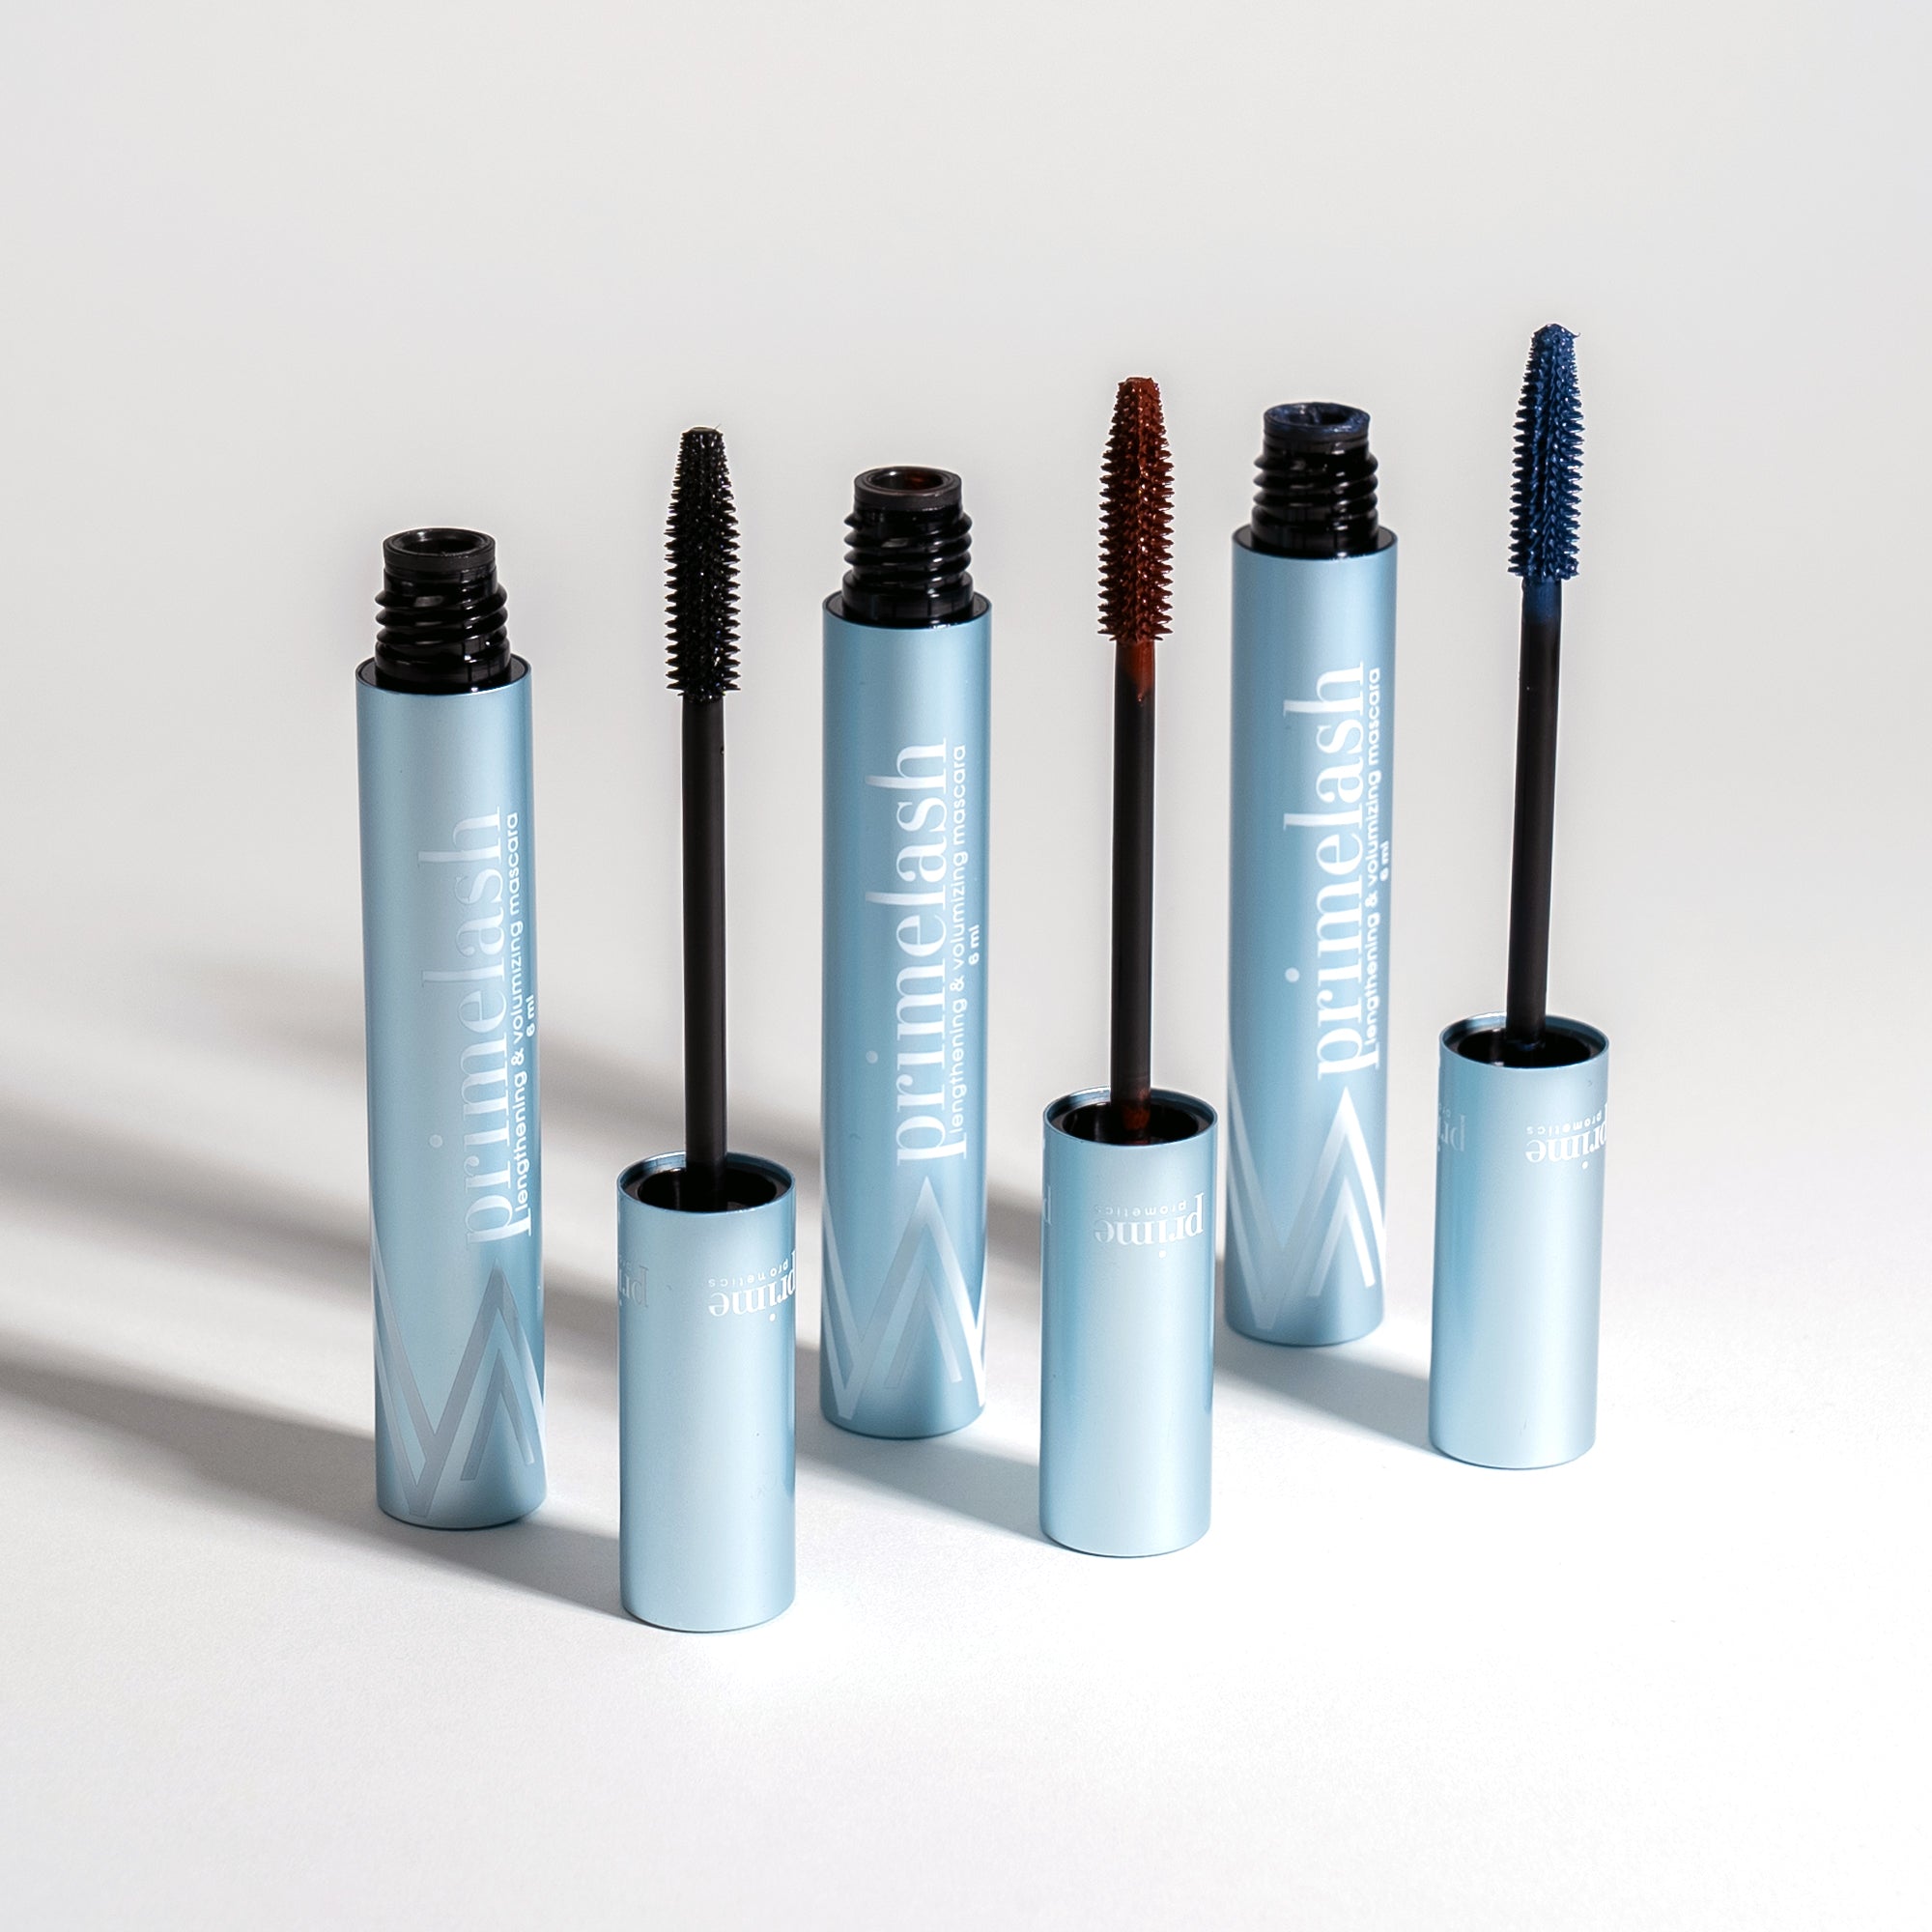 Prime Prometics Primelash Mascara for Women Over 50 Volumizing, Incredible Length in 2 Coats Long-Stay, Zero Clumps, Hypoallergenic (Blue)